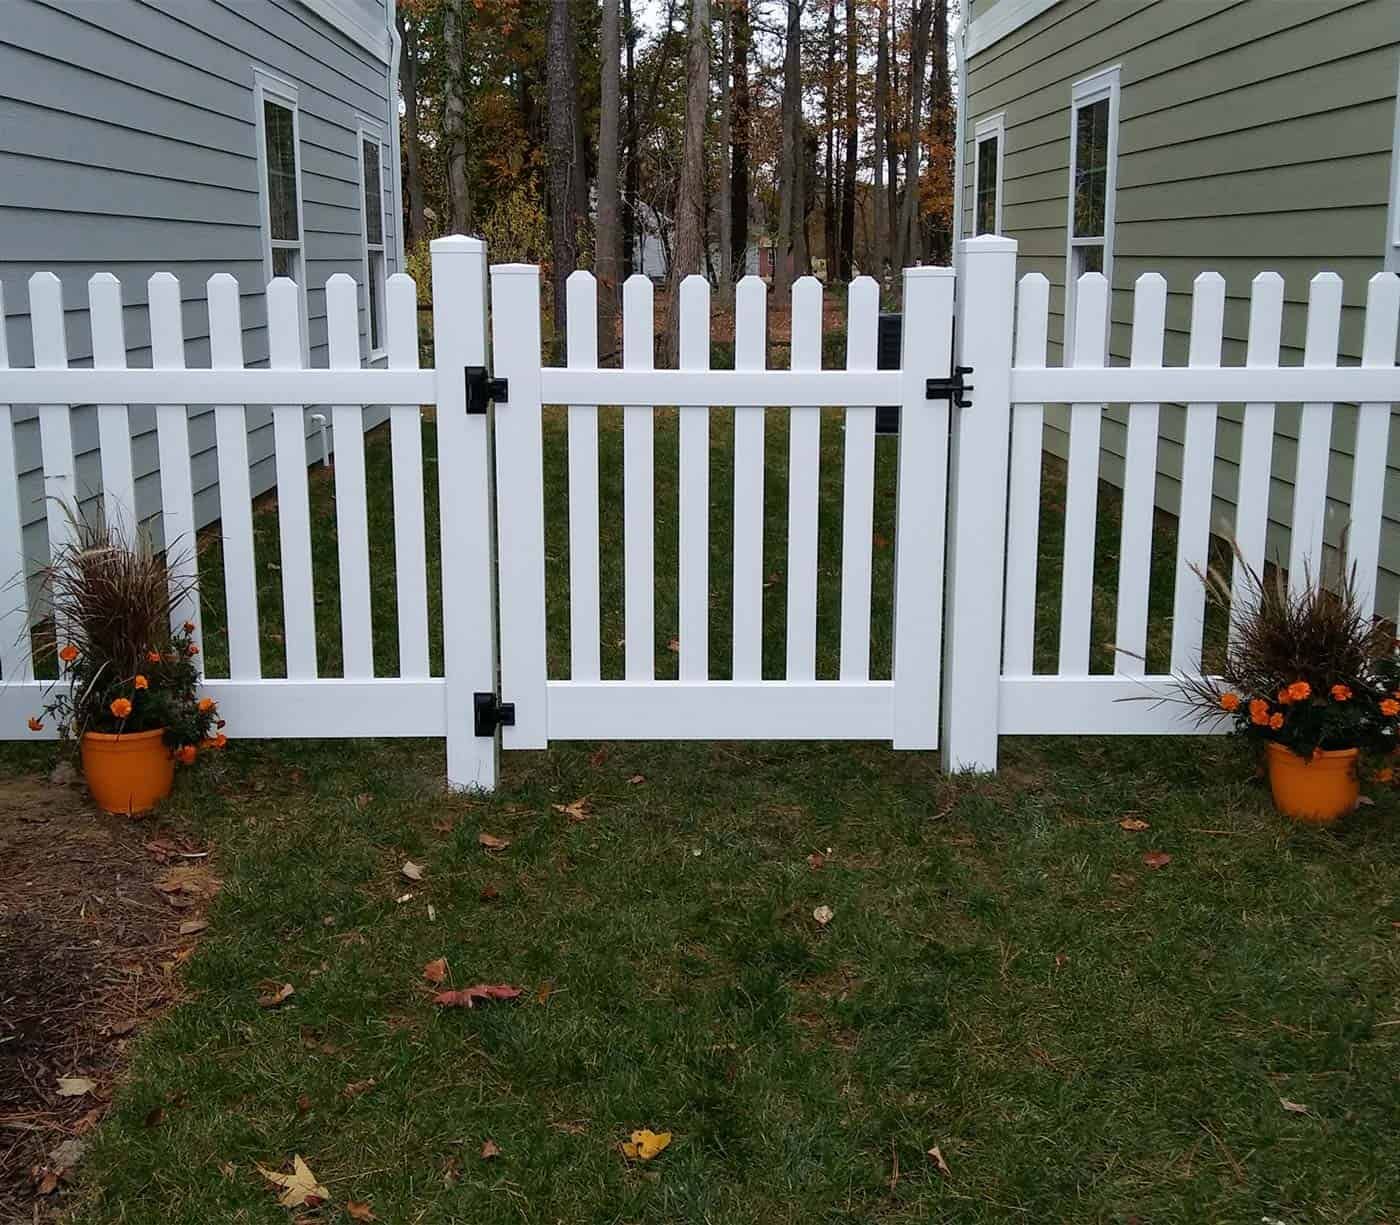 An image of a white poly picket fence